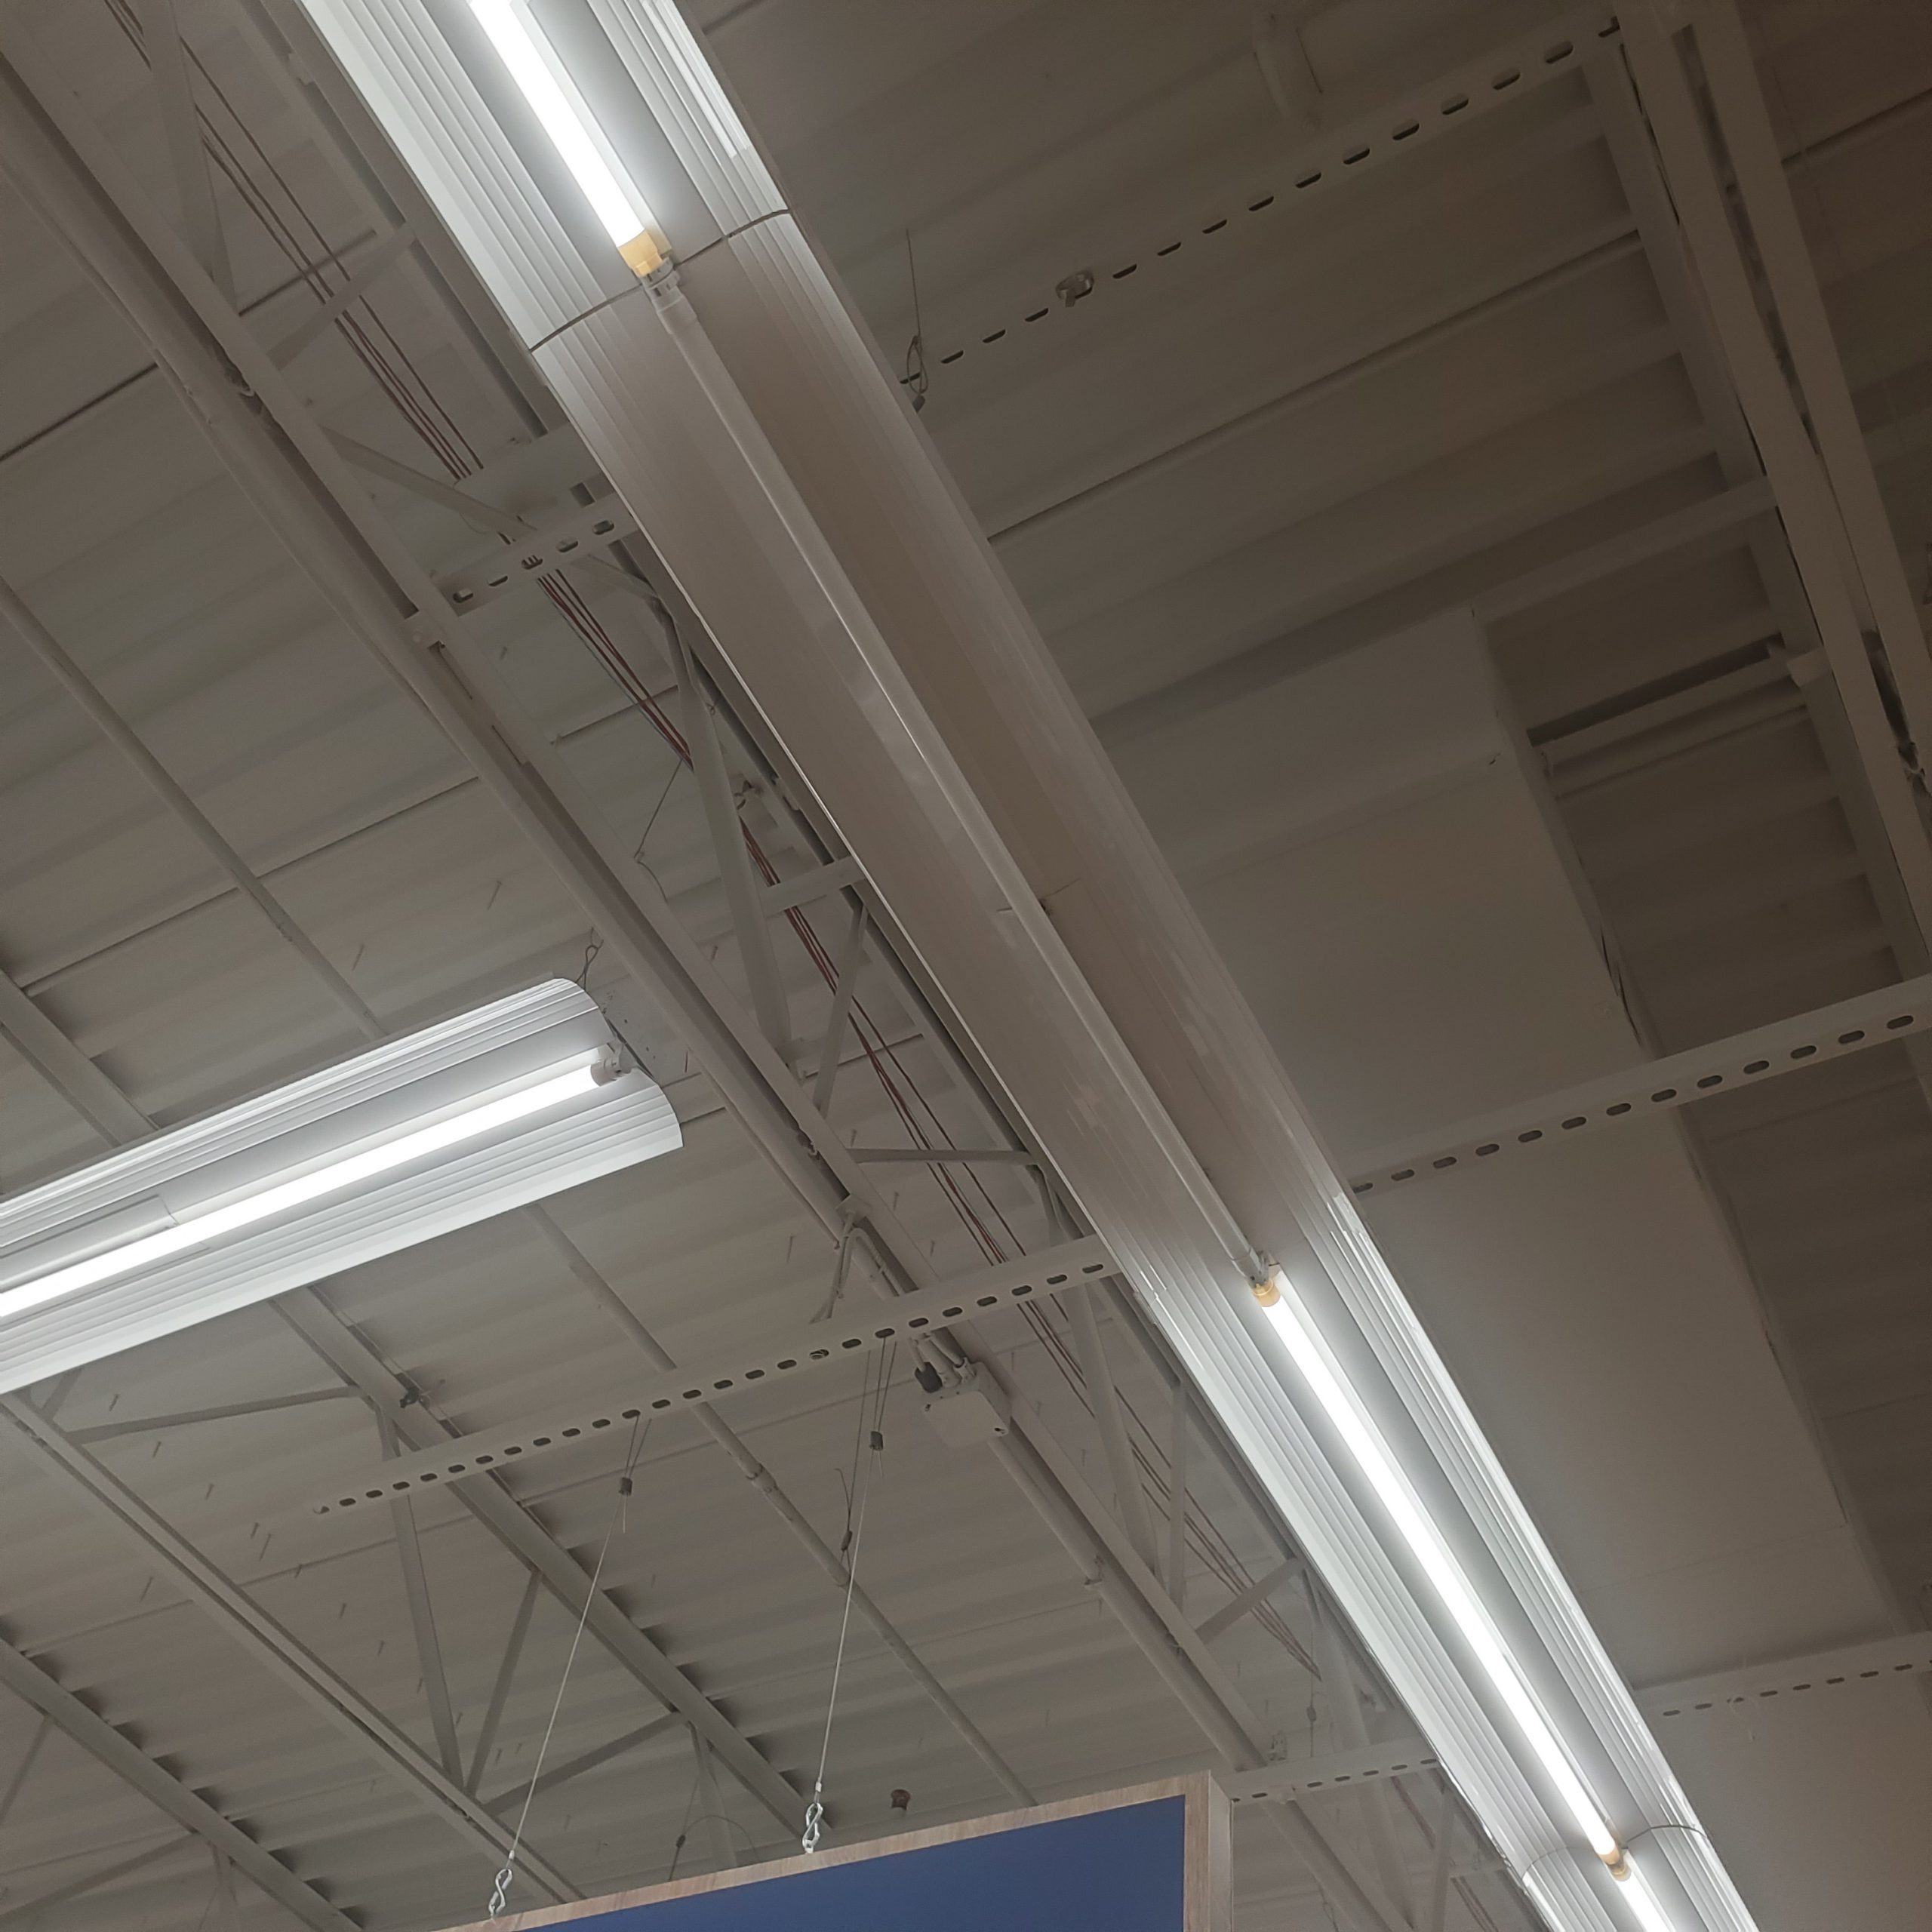 Another photo of failed LED tubes inside a big box retail store